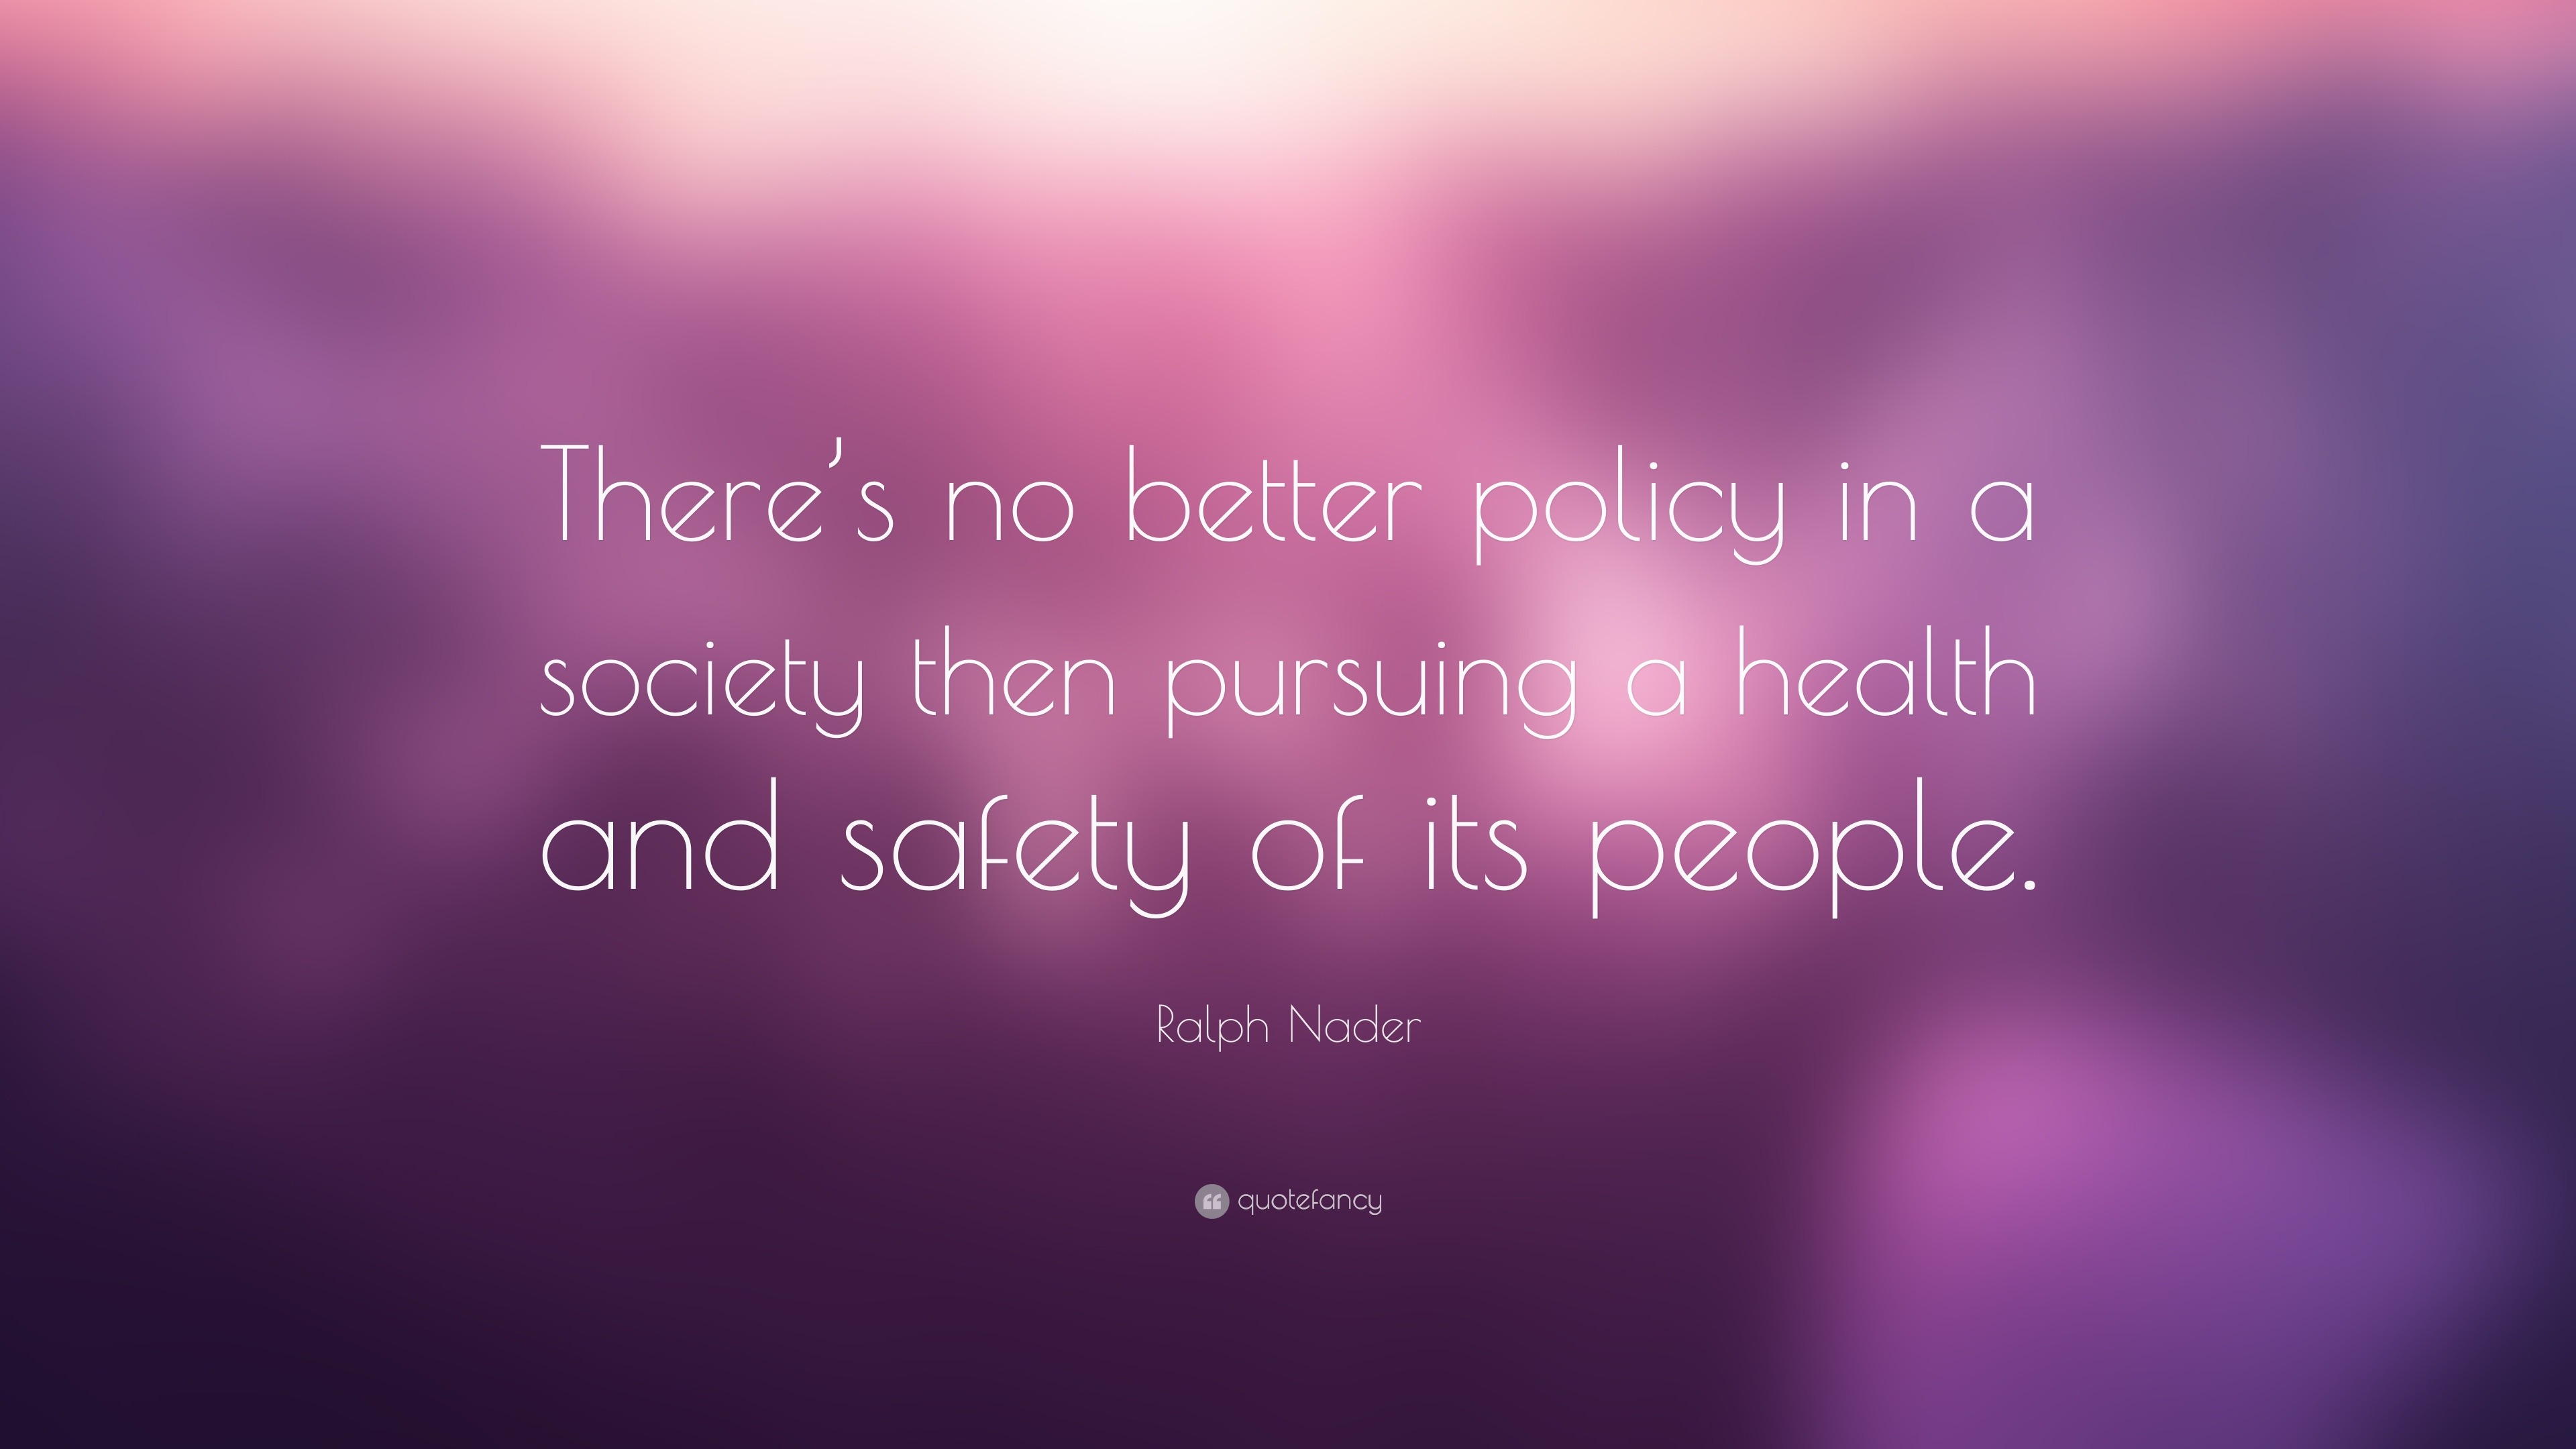 Ralph Nader Quote There S No Better Policy In A Society Then Pursuing A Health And Safety